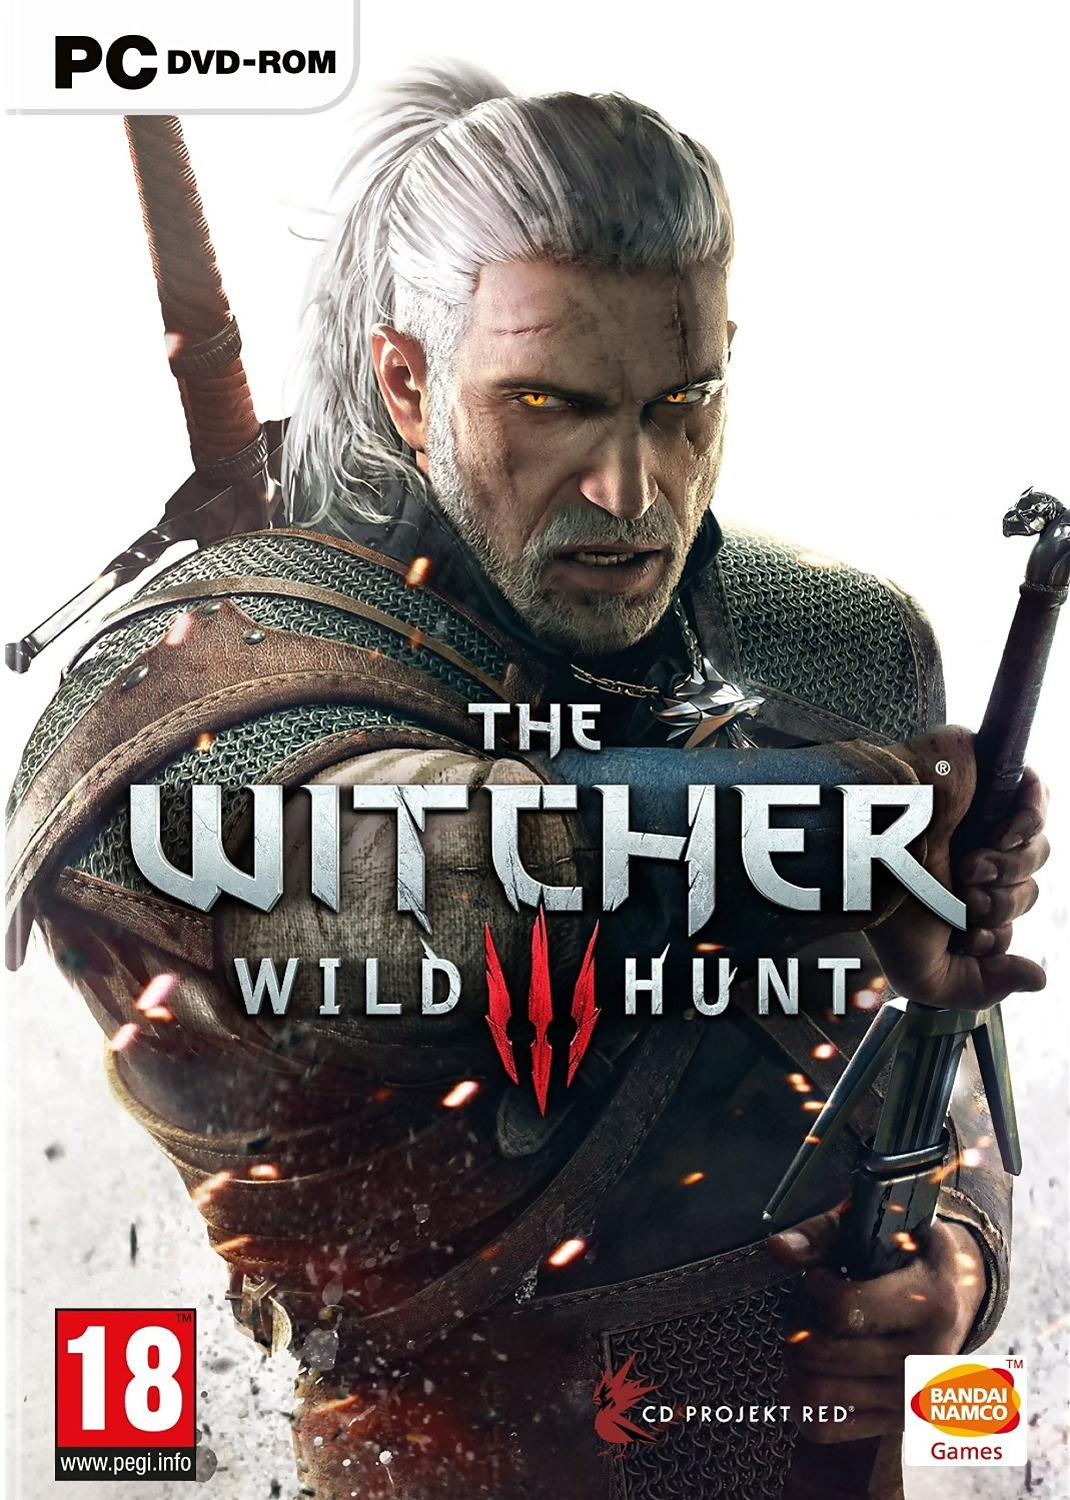 witcher 3 patch download lin